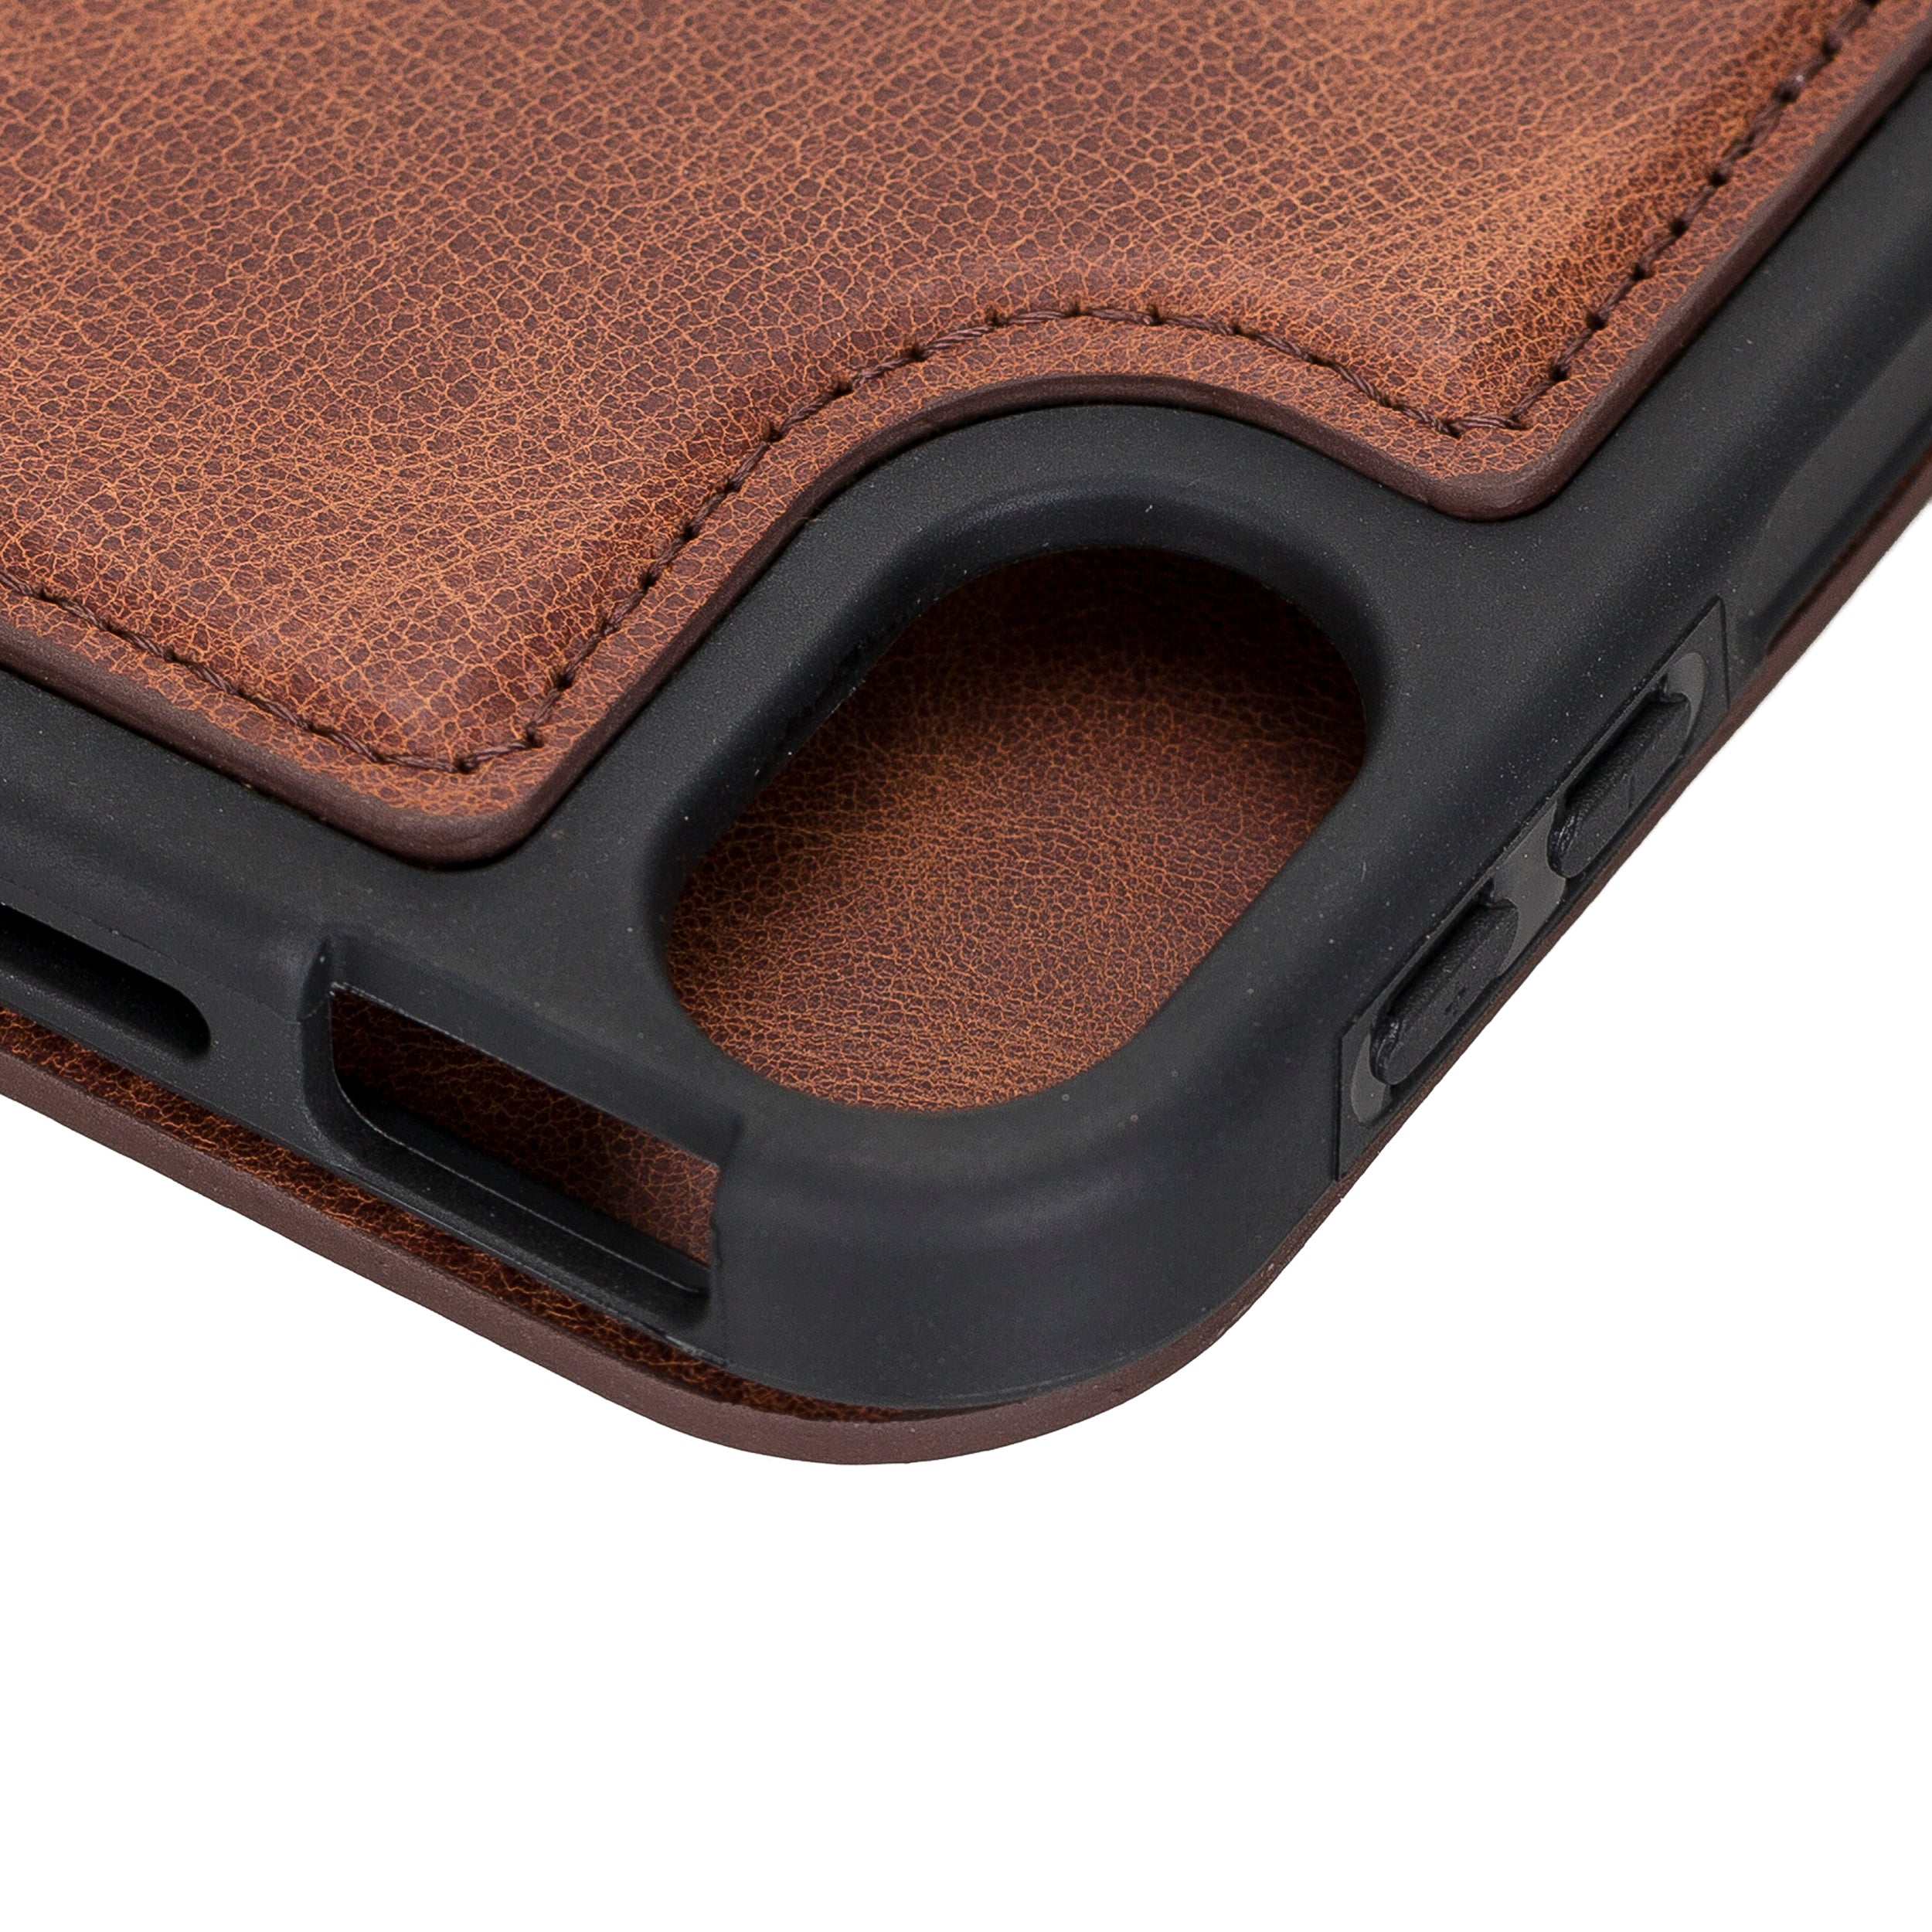 iPhone Leather cases, wallets, ipad & macbook leather cases